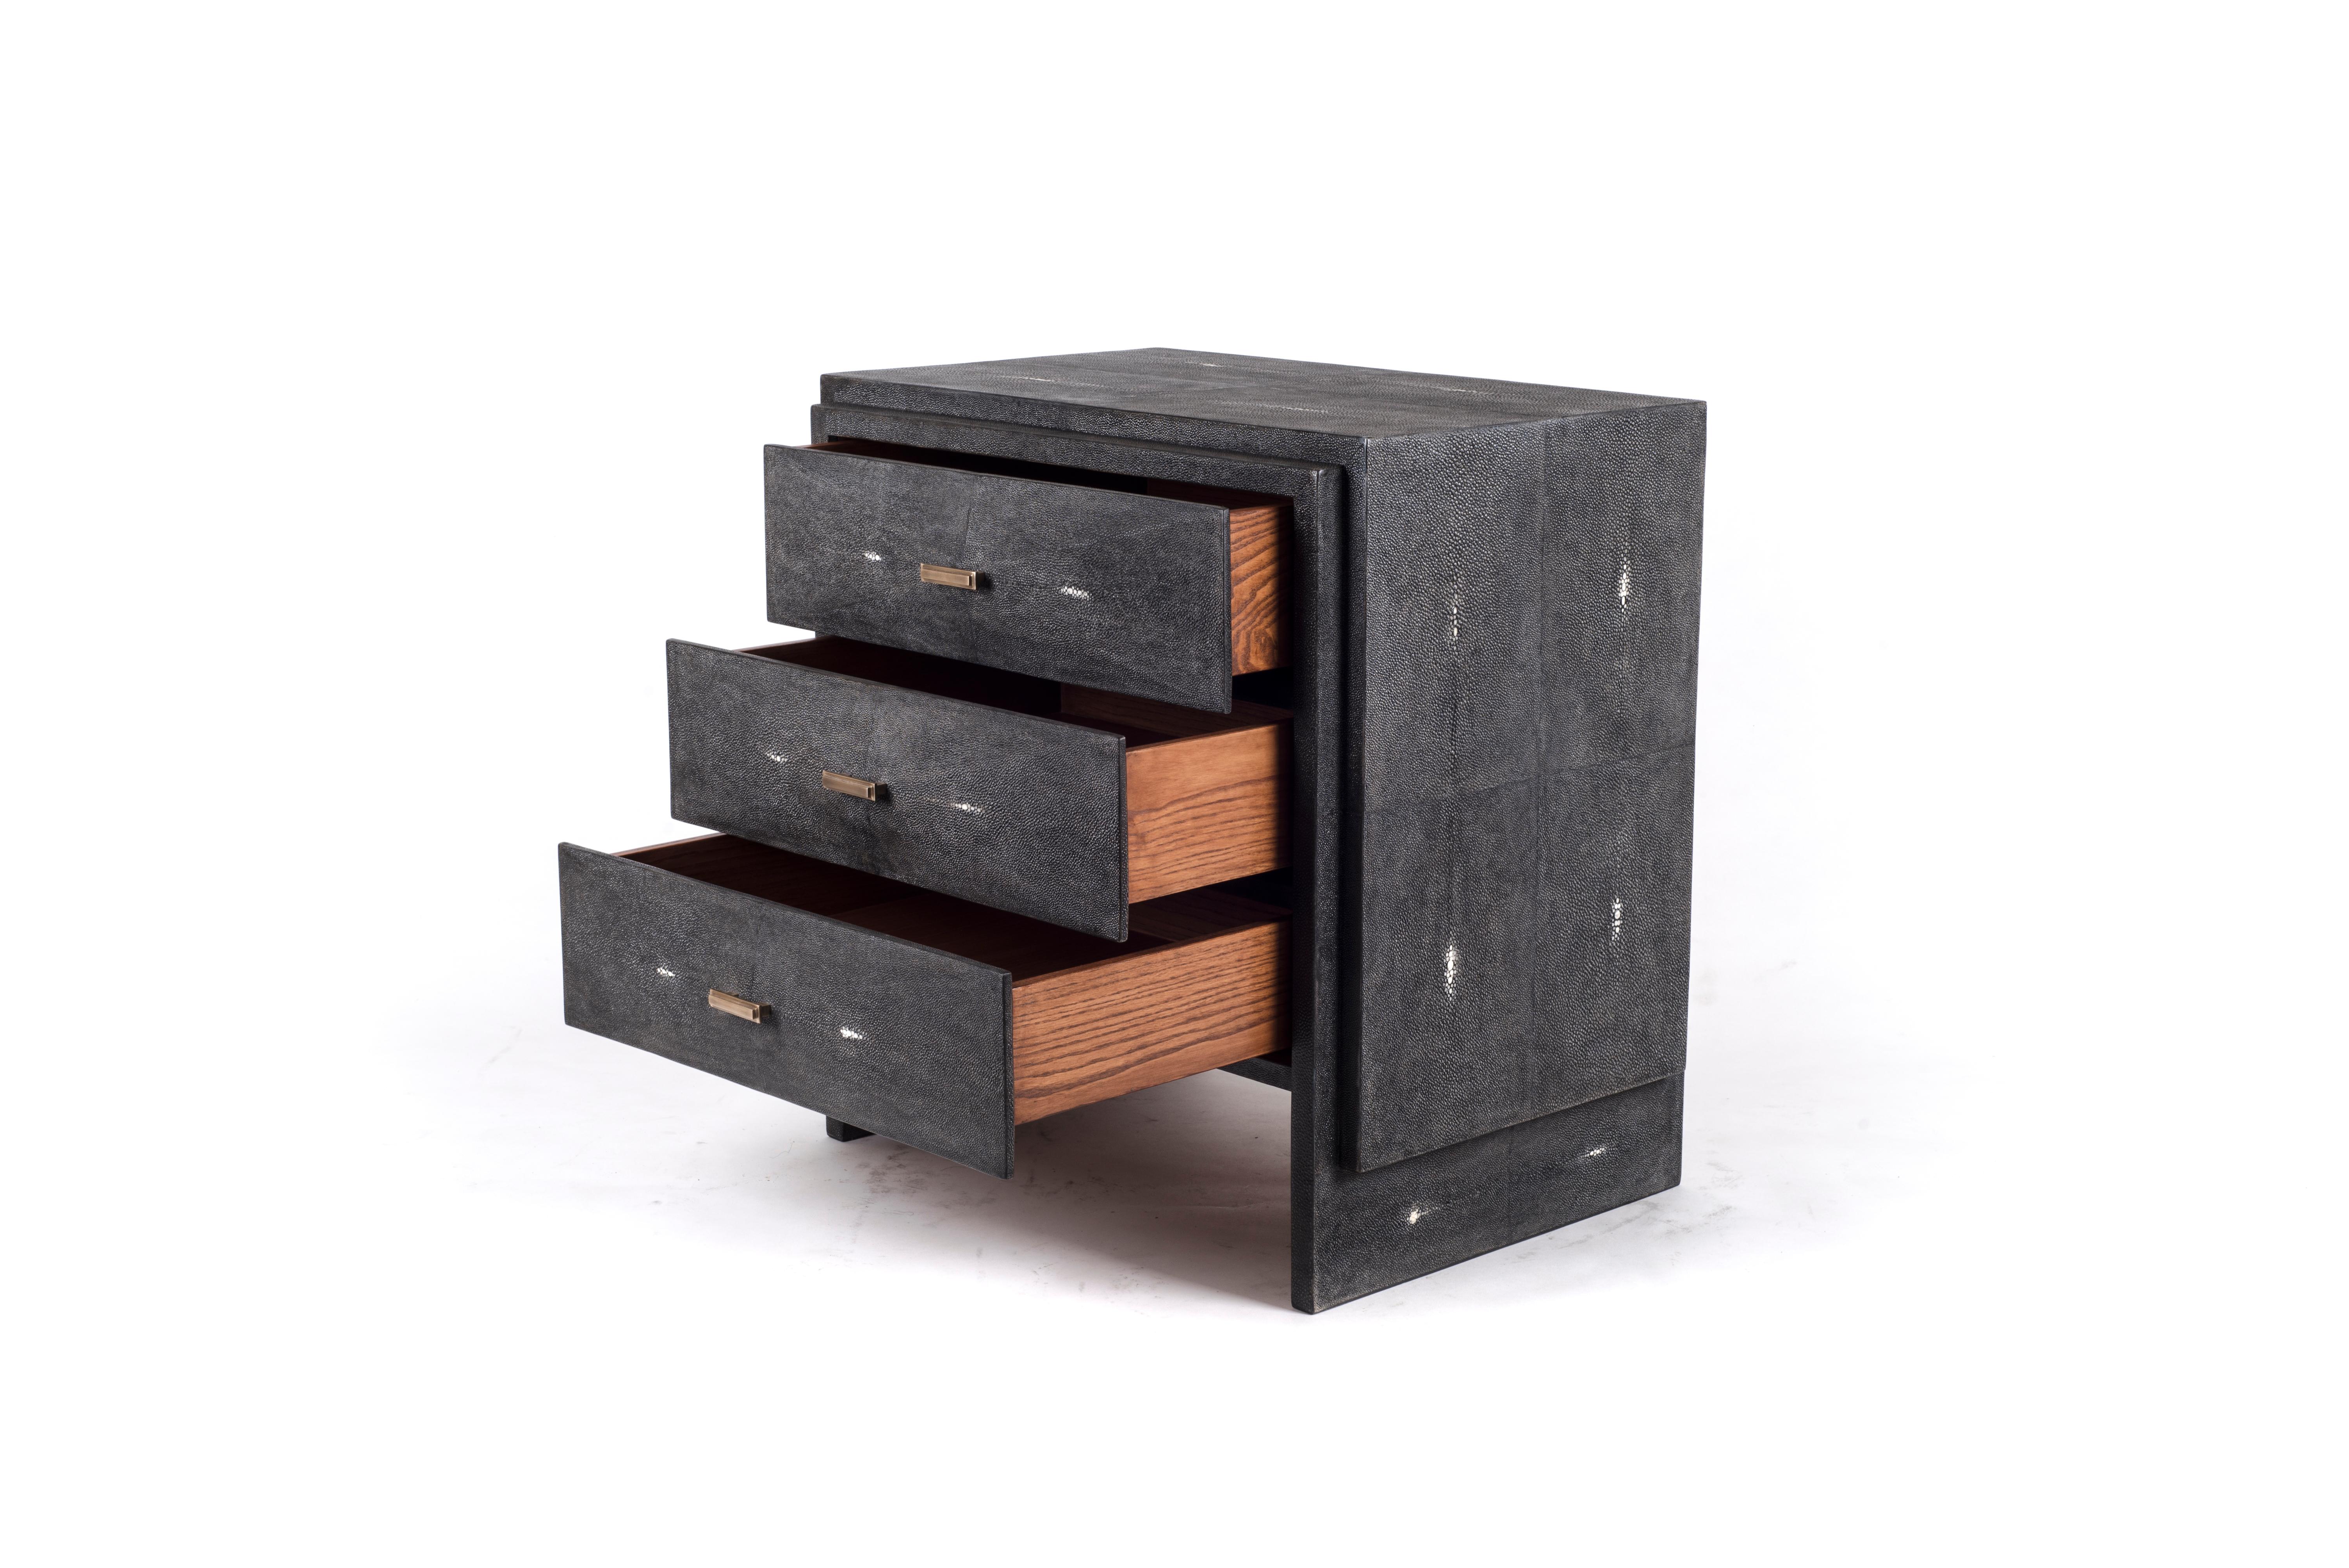 The iconic bedside by R&Y Augousti is one of their first designs. A classic and functional bedside table, with subtle geometry on the beveled drawers. This bedside table is completely inlaid in coal black shagreen with discreet bronze-patina brass